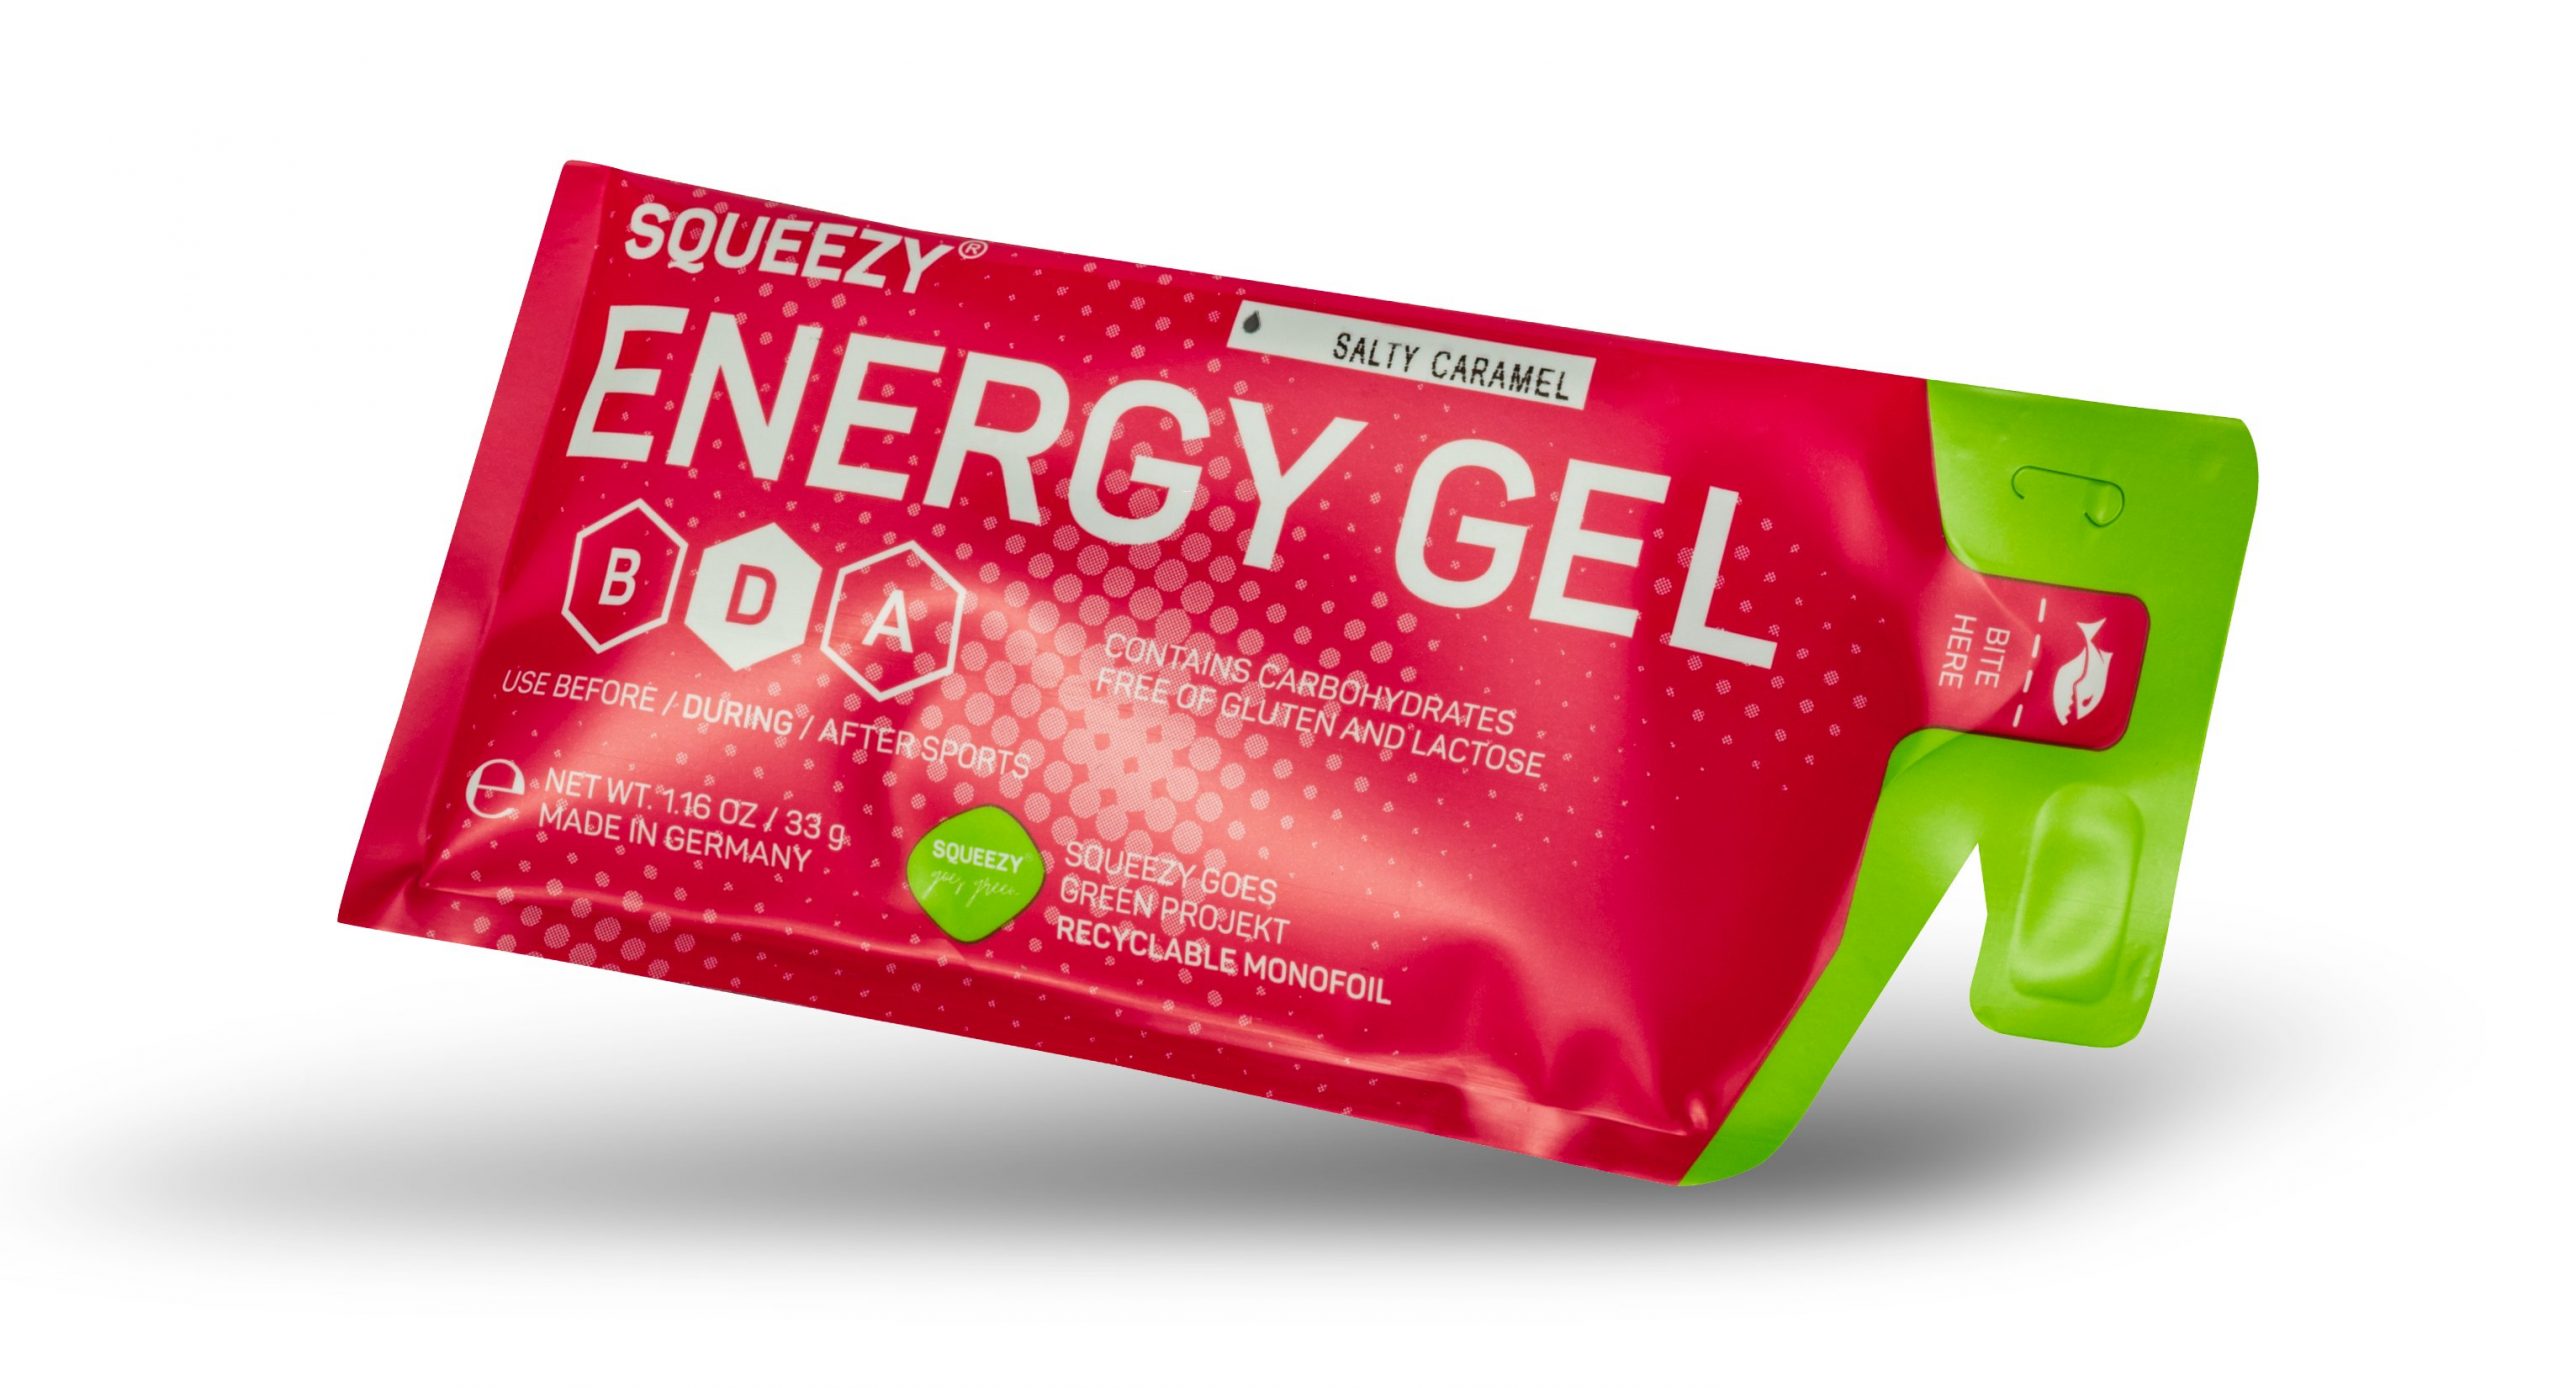 Squeezy Energy Gel in the new recyclable monofilm.